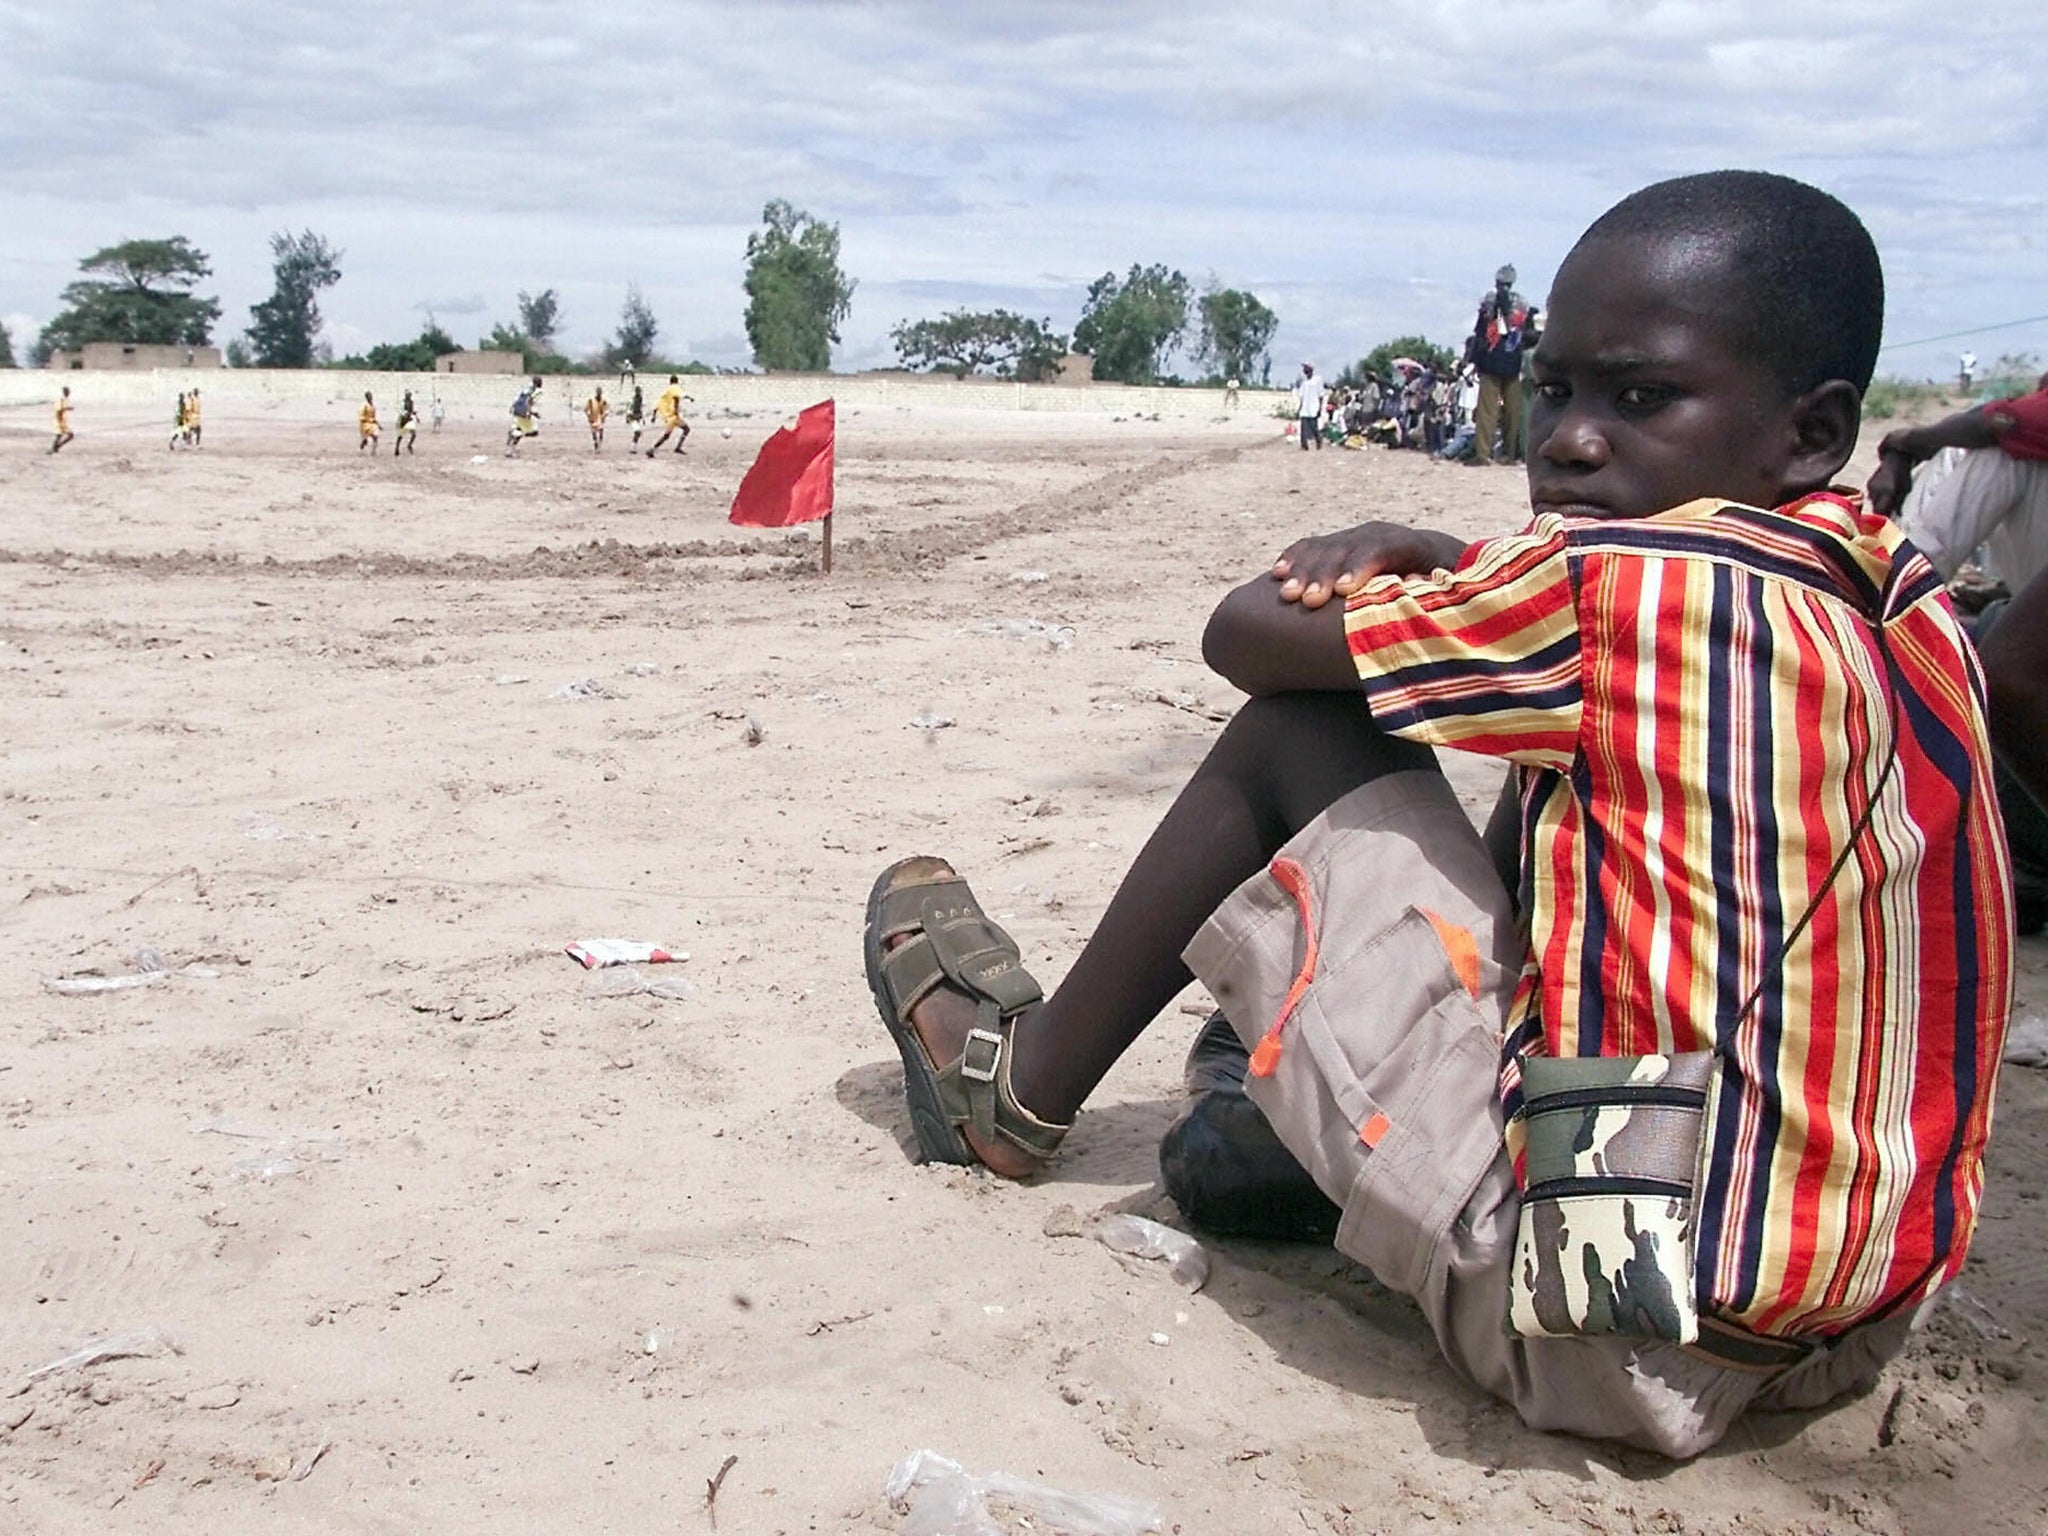 A teenager in Senegal watches a football match